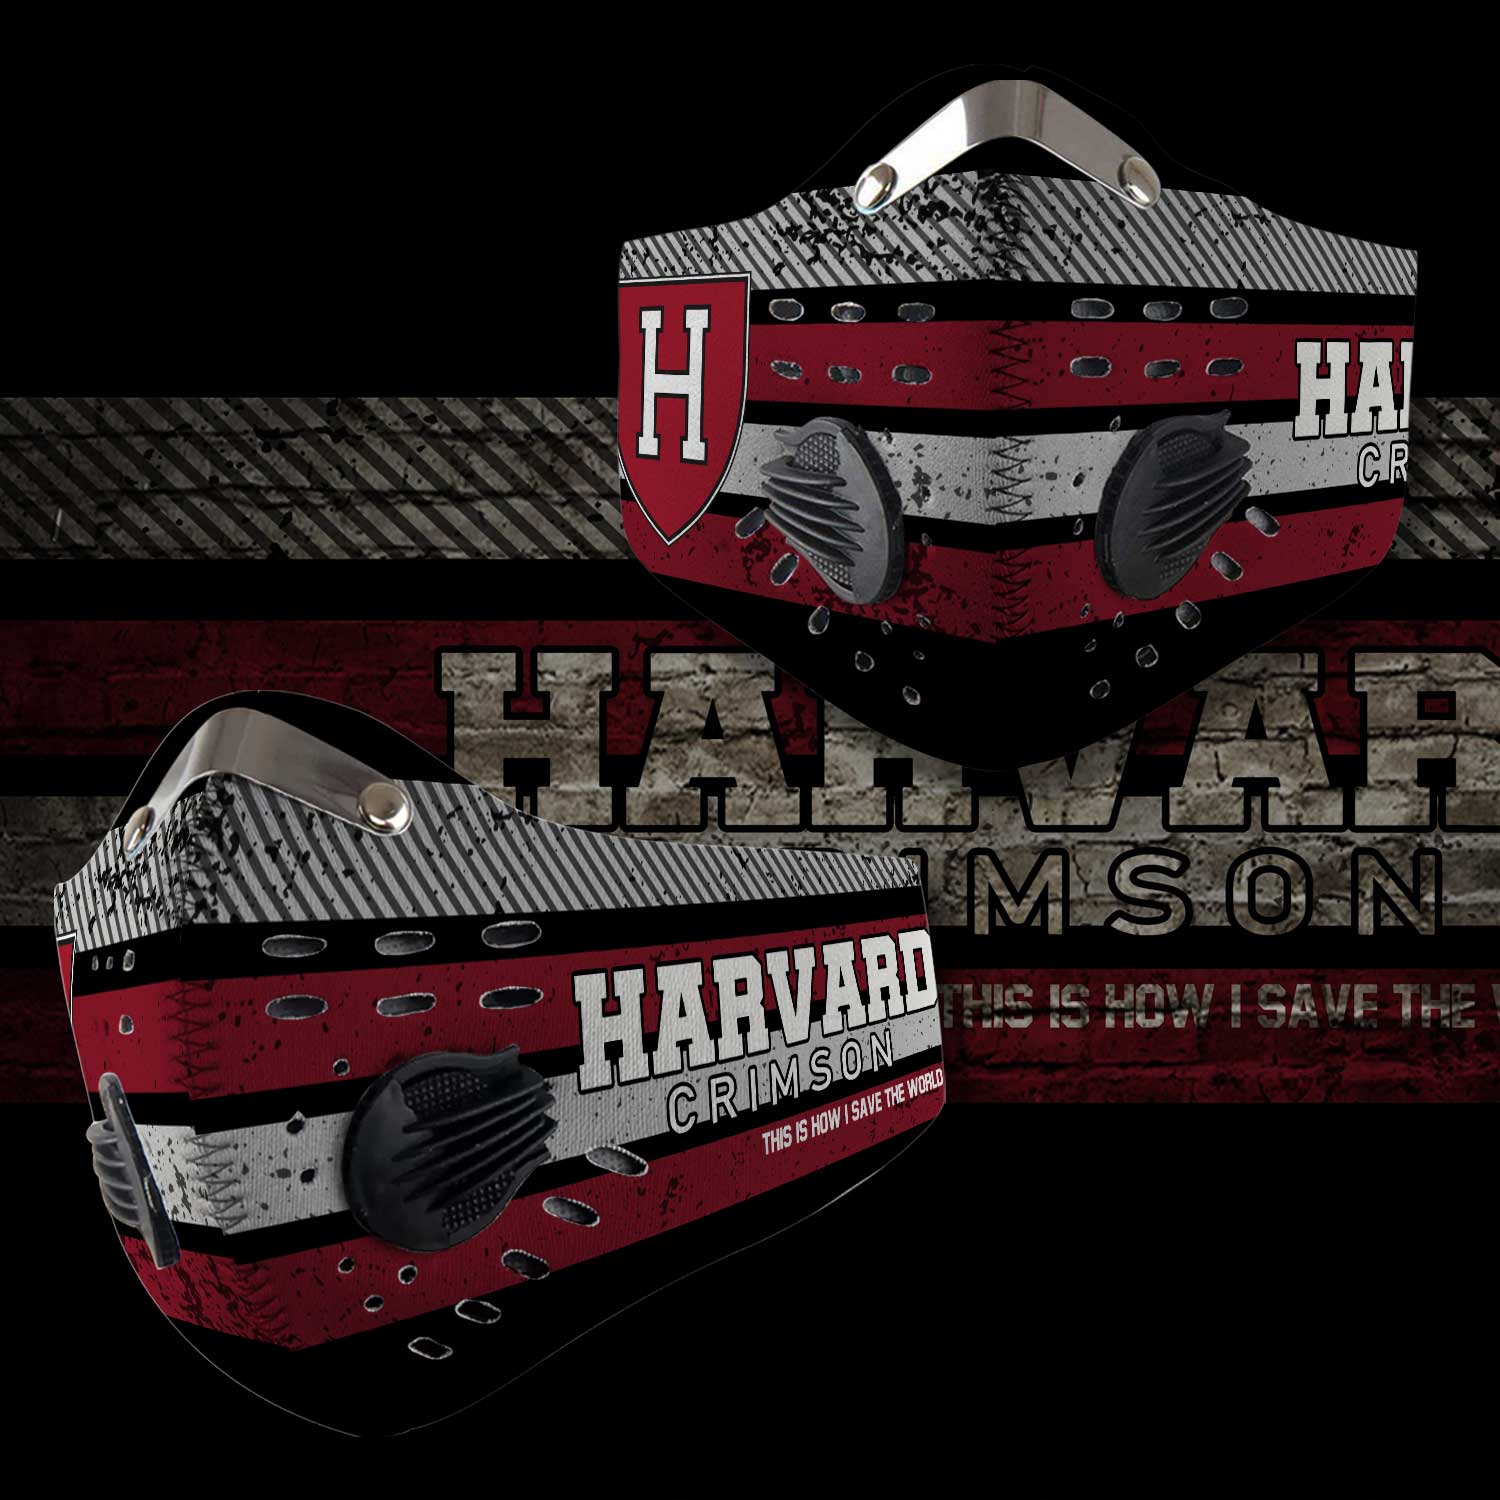 Harvard crimson this is how i save the world carbon filter face mask